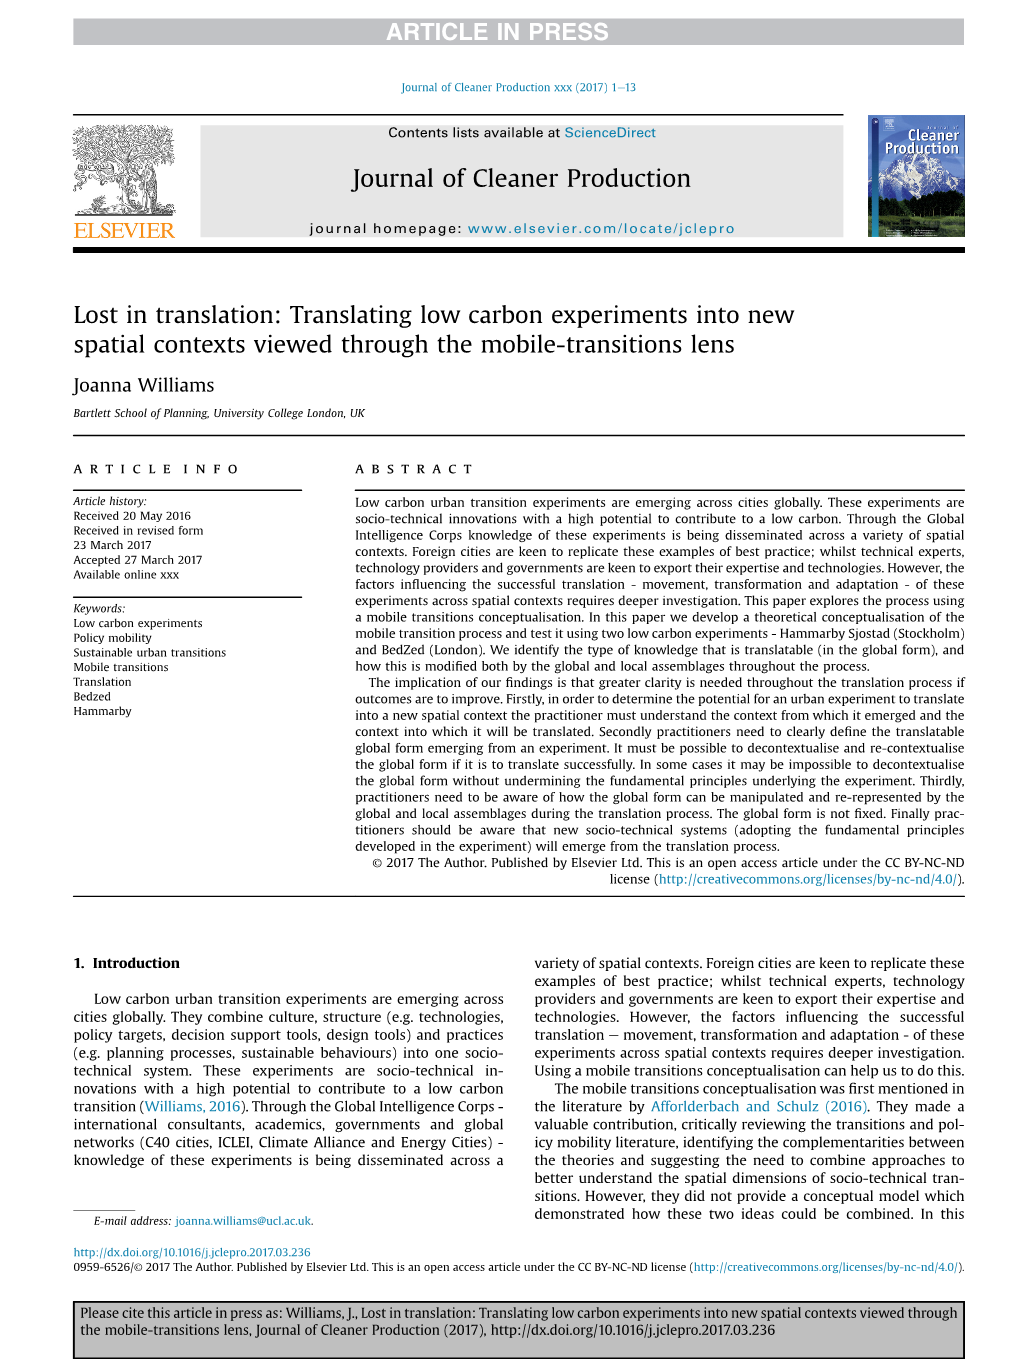 Translating Low Carbon Experiments Into New Spatial Contexts Viewed Through the Mobile-Transitions Lens